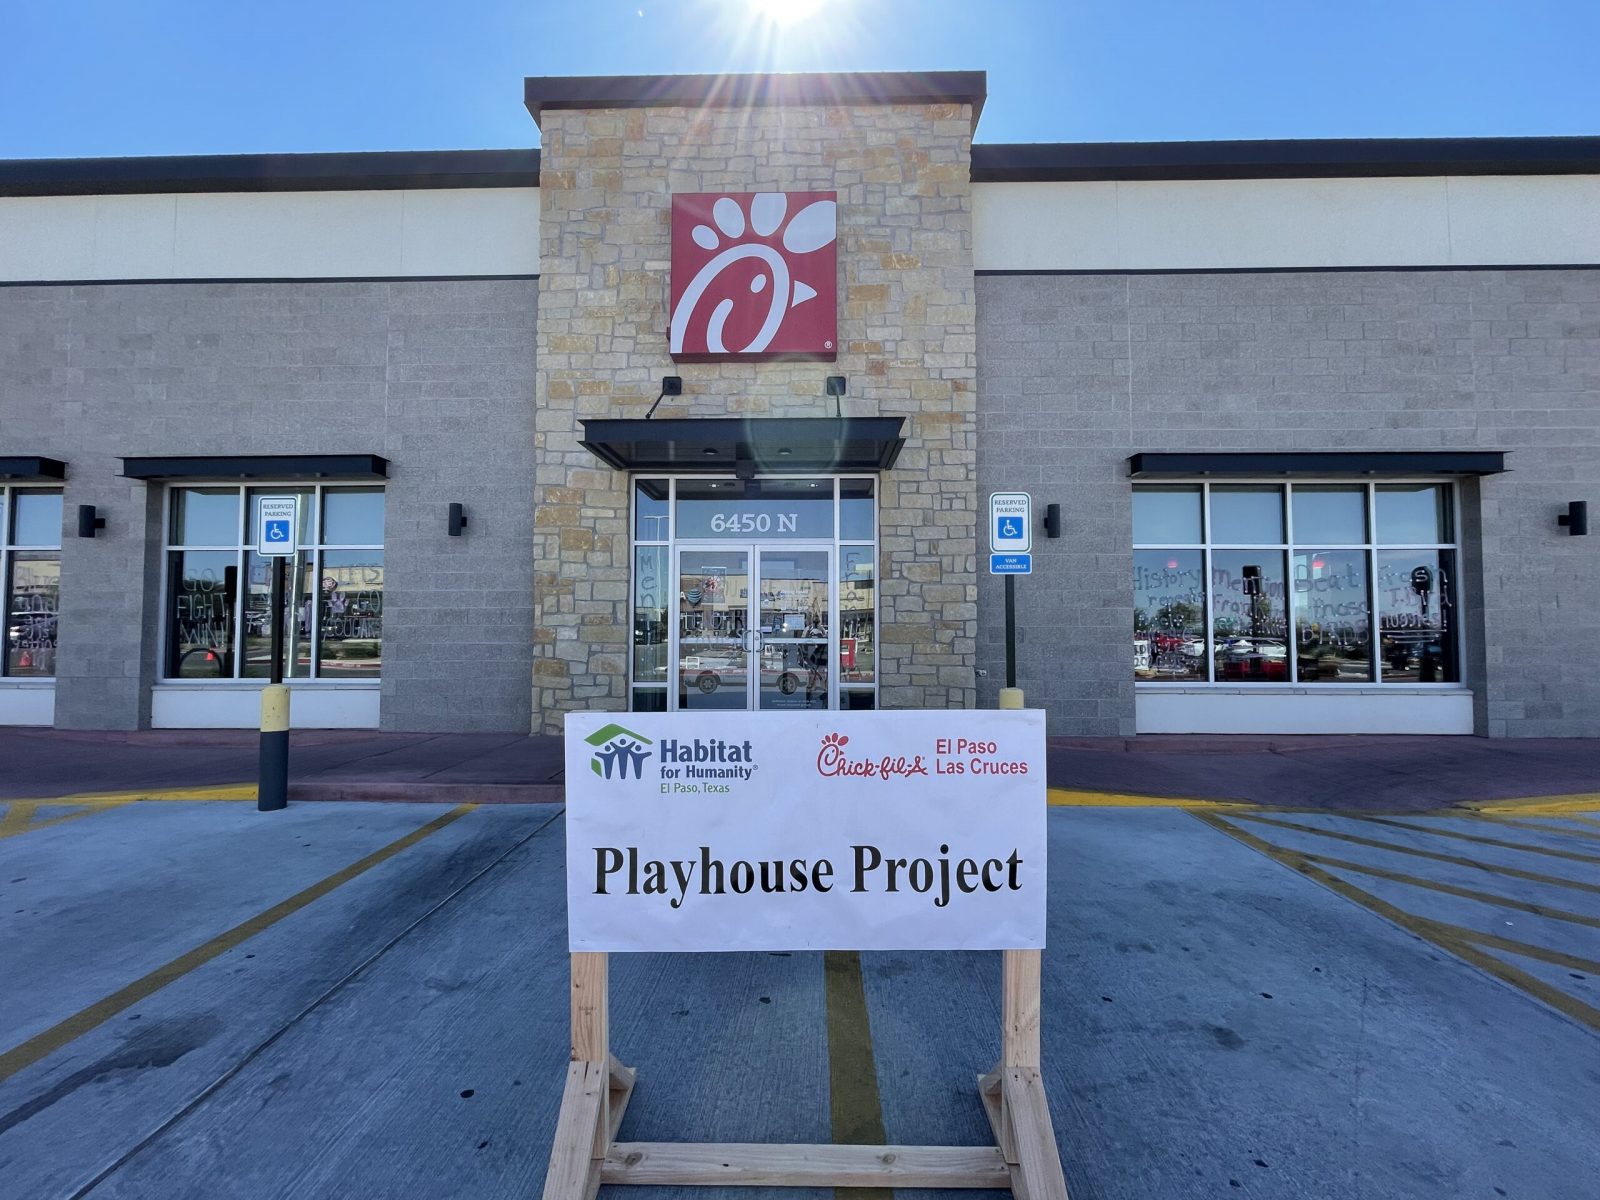 Chick-Fil-A Habitat for Humanity Event